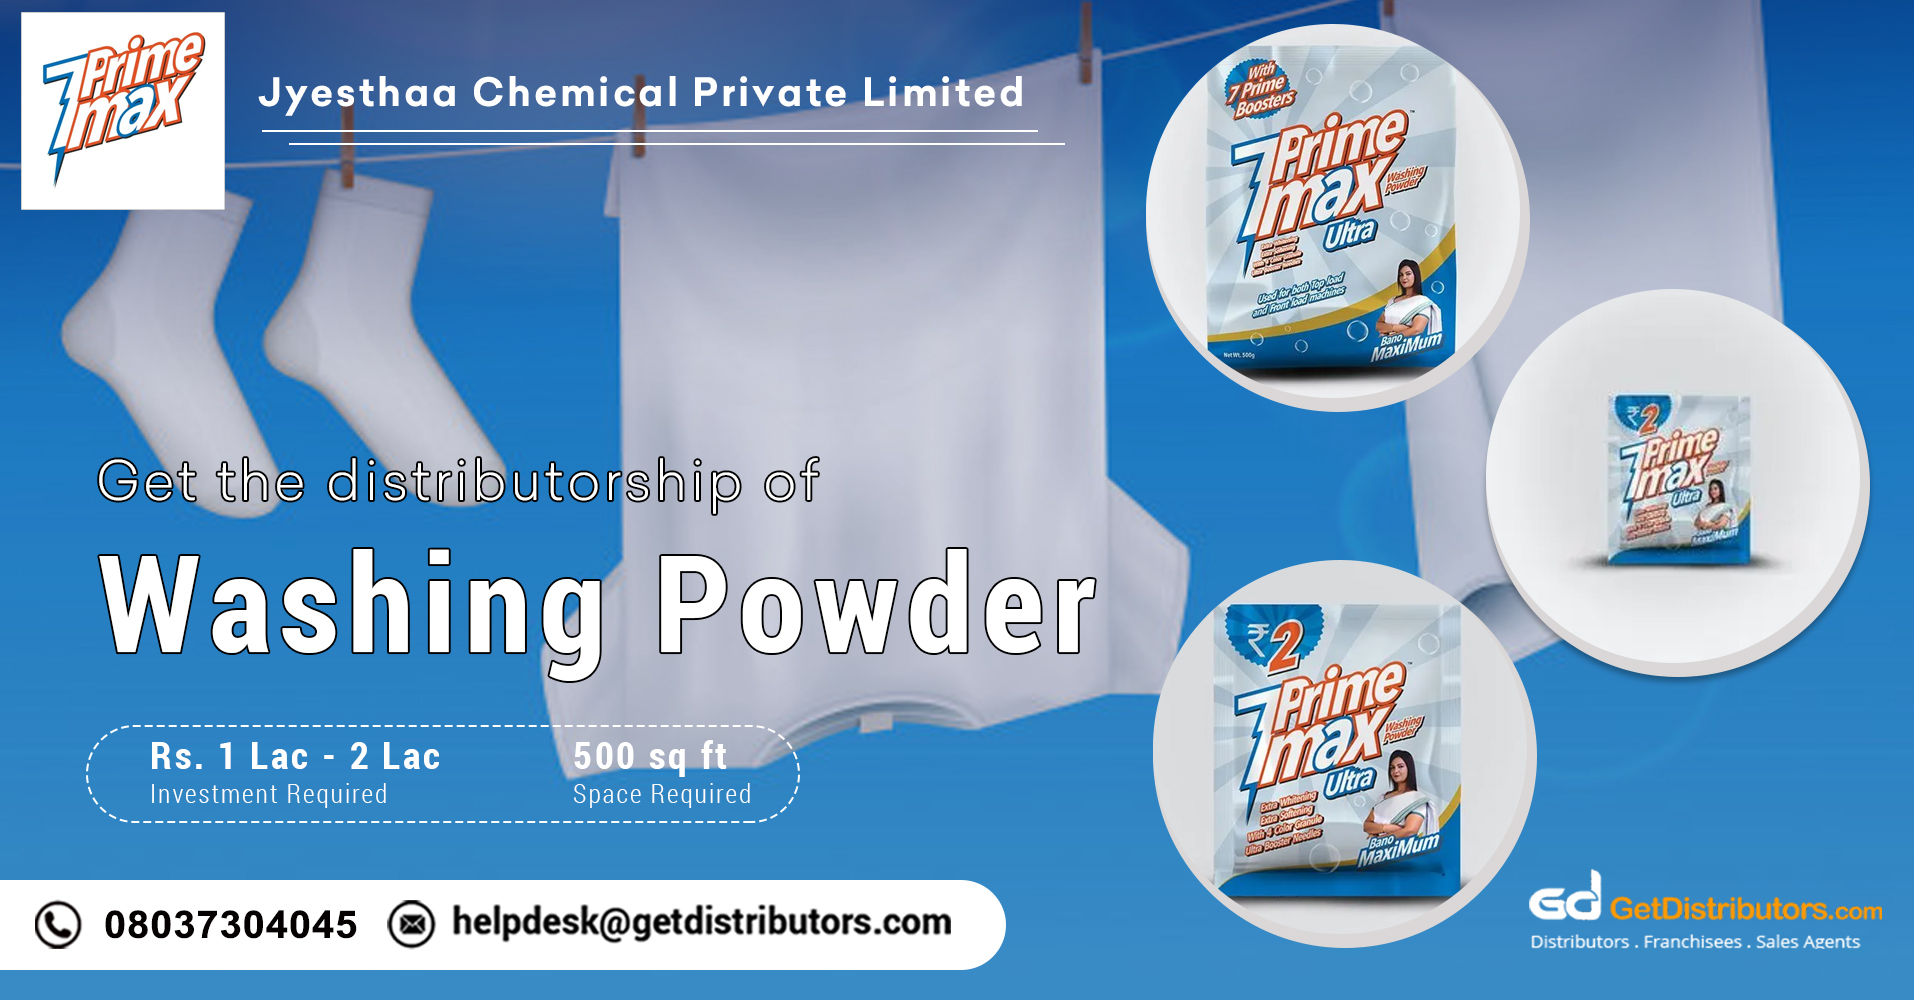 Best-in-class washing powders for distribution